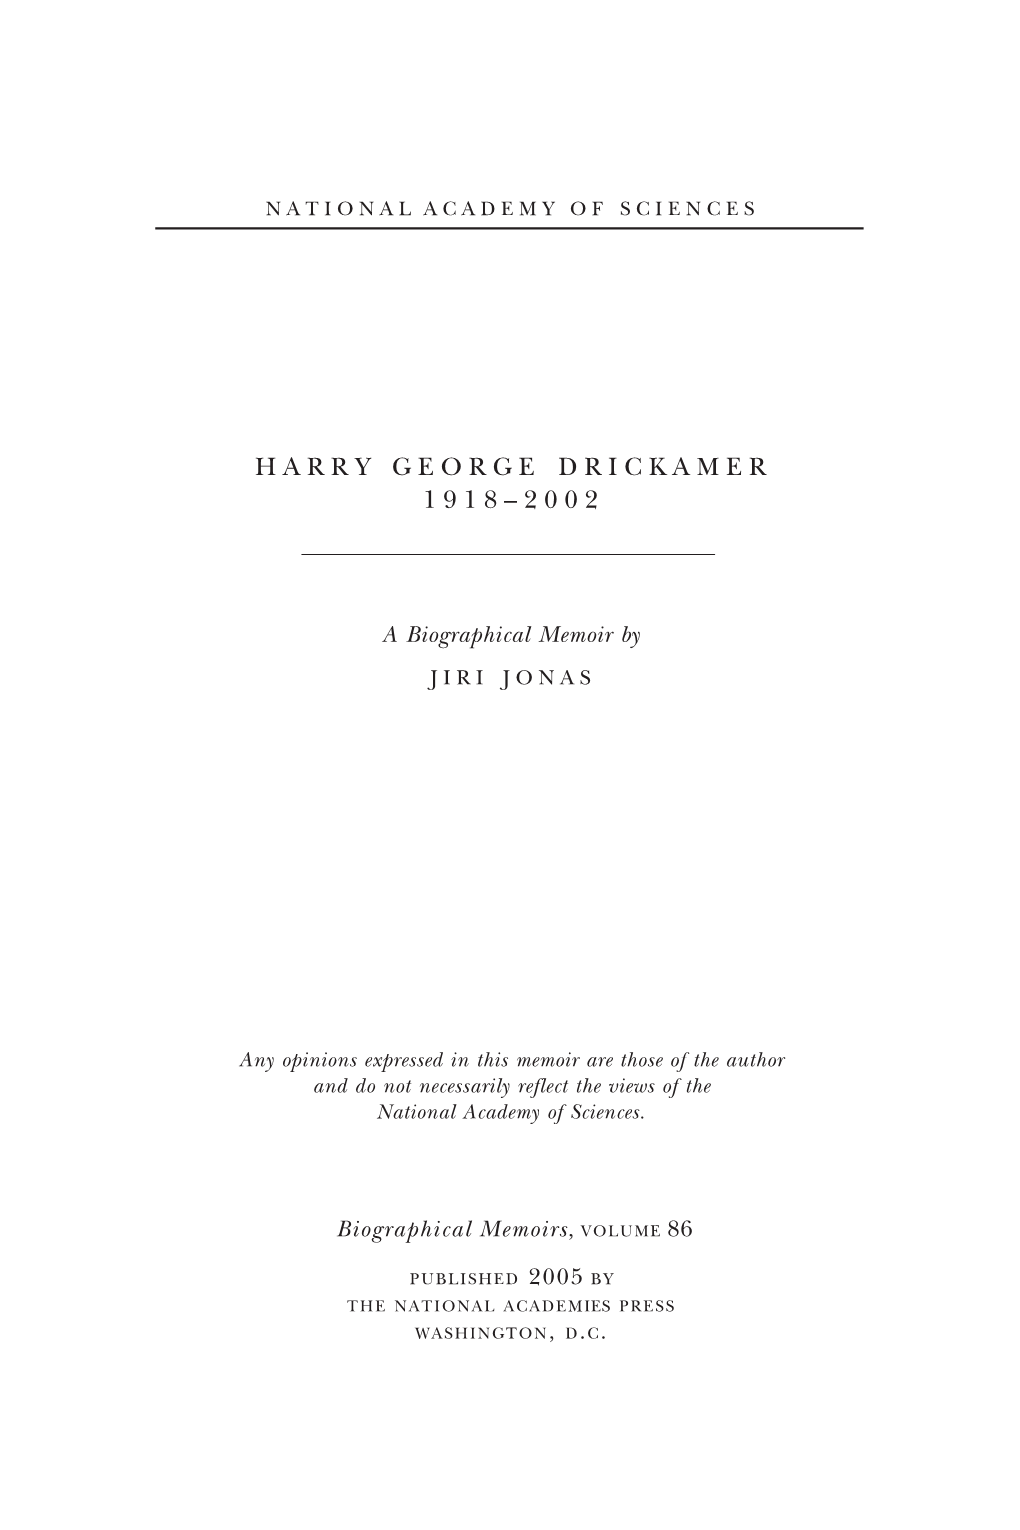 Harry Drickamer Developed and Exploited, Be- Came a Tool of Great Power and Versatility, Presently Used by Many Research Groups Throughout the World